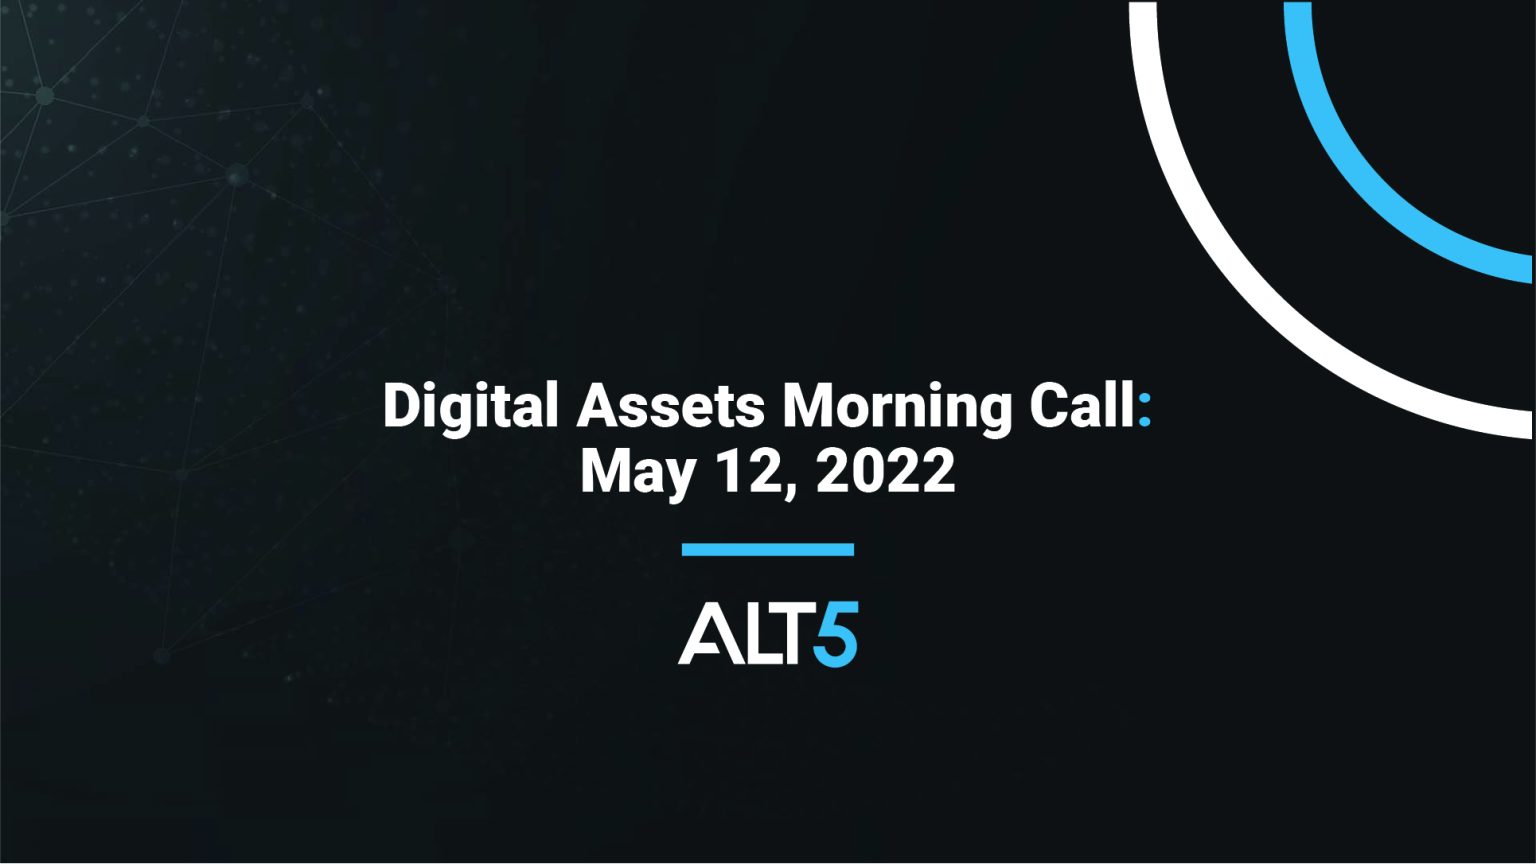 Digital Assets Morning Call: May 12 2022 - Downward momentum in crypto assets broadens